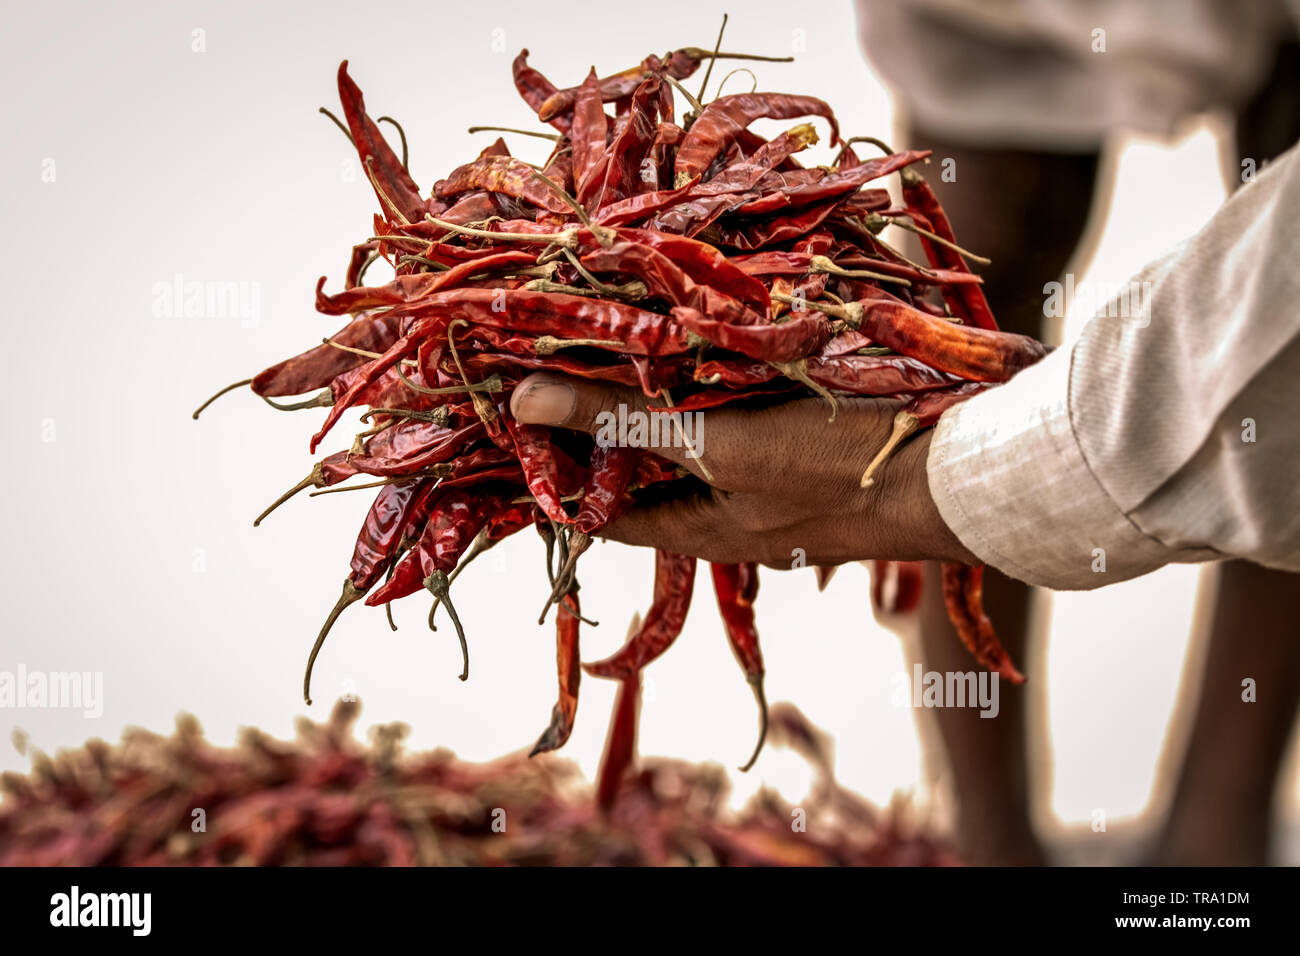 Dried red chilli peppers. Indian man's hand holding a big handful of spicy red cayenne chilies with a pile of chilies out of focus in the background. Stock Photo